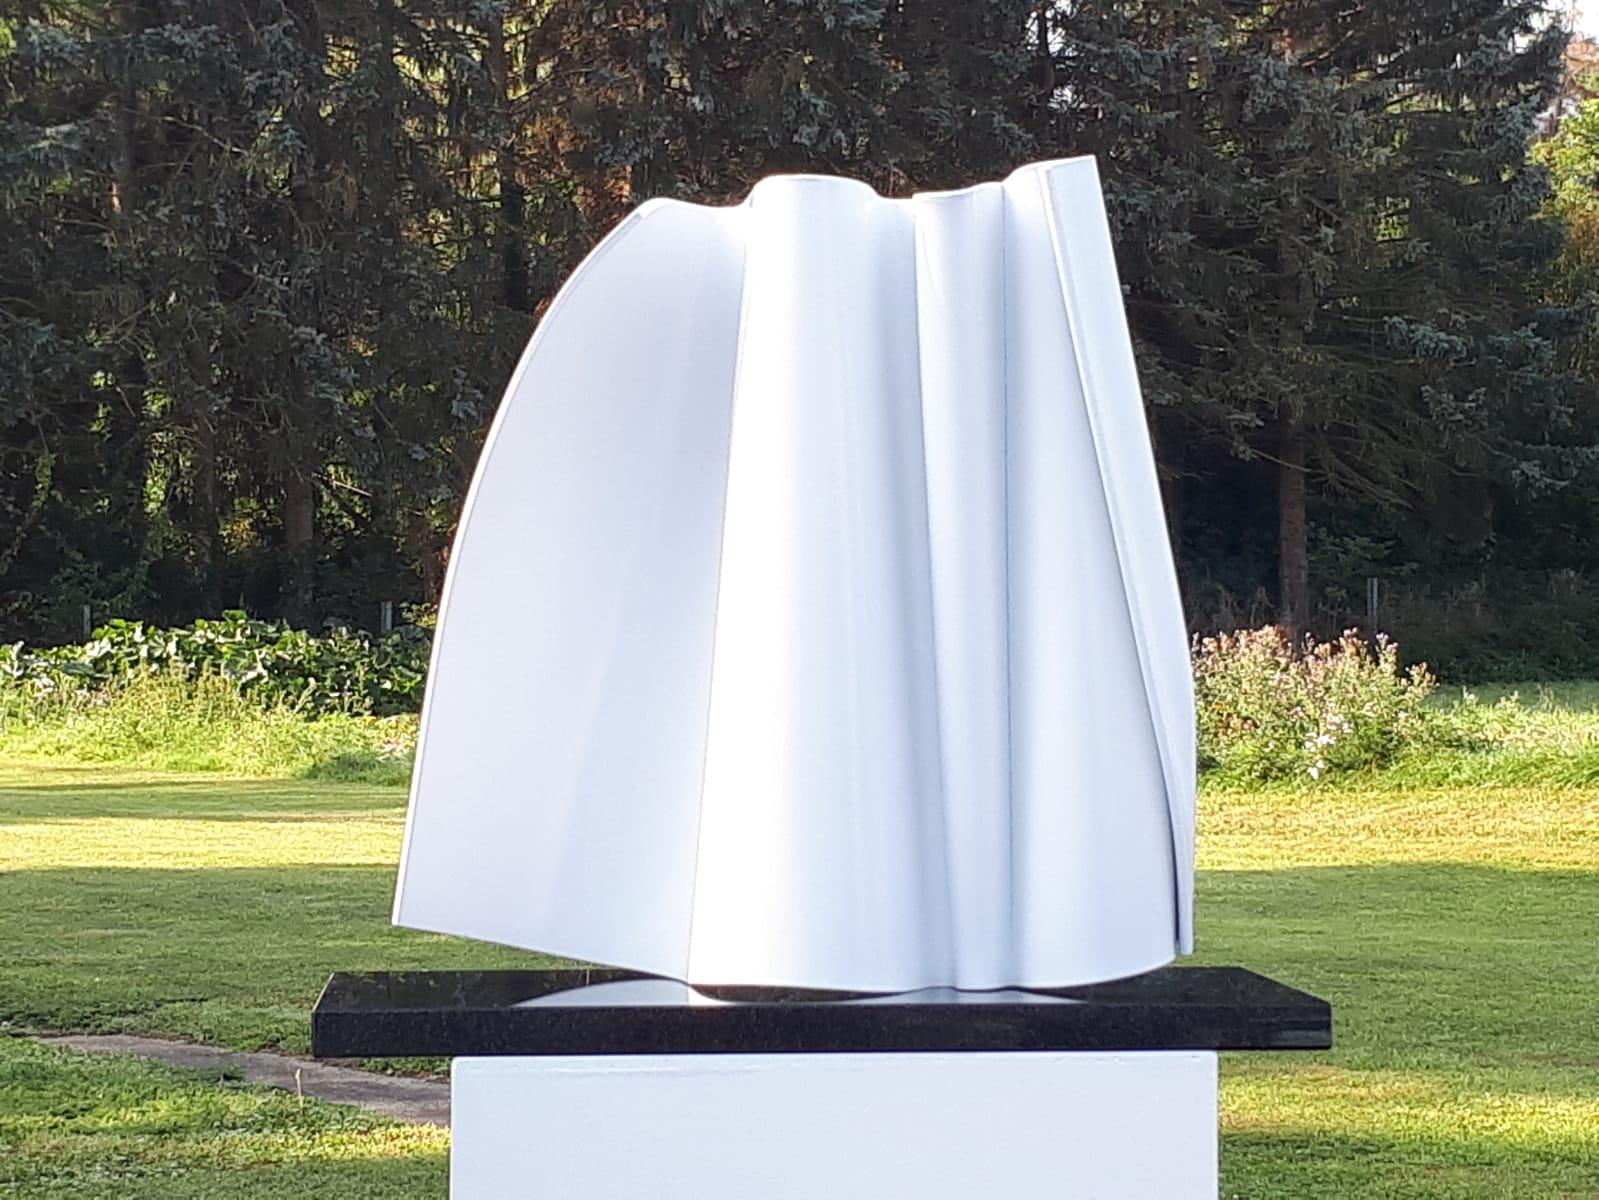 This beautiful large white sculpture can be used for indoor or outdoors. It is lacquered in a stunning white and makes for an elegant statement in any garden, lobby or private home.

Artist: Kuno Vollet
Size: 100 x 25 x 25